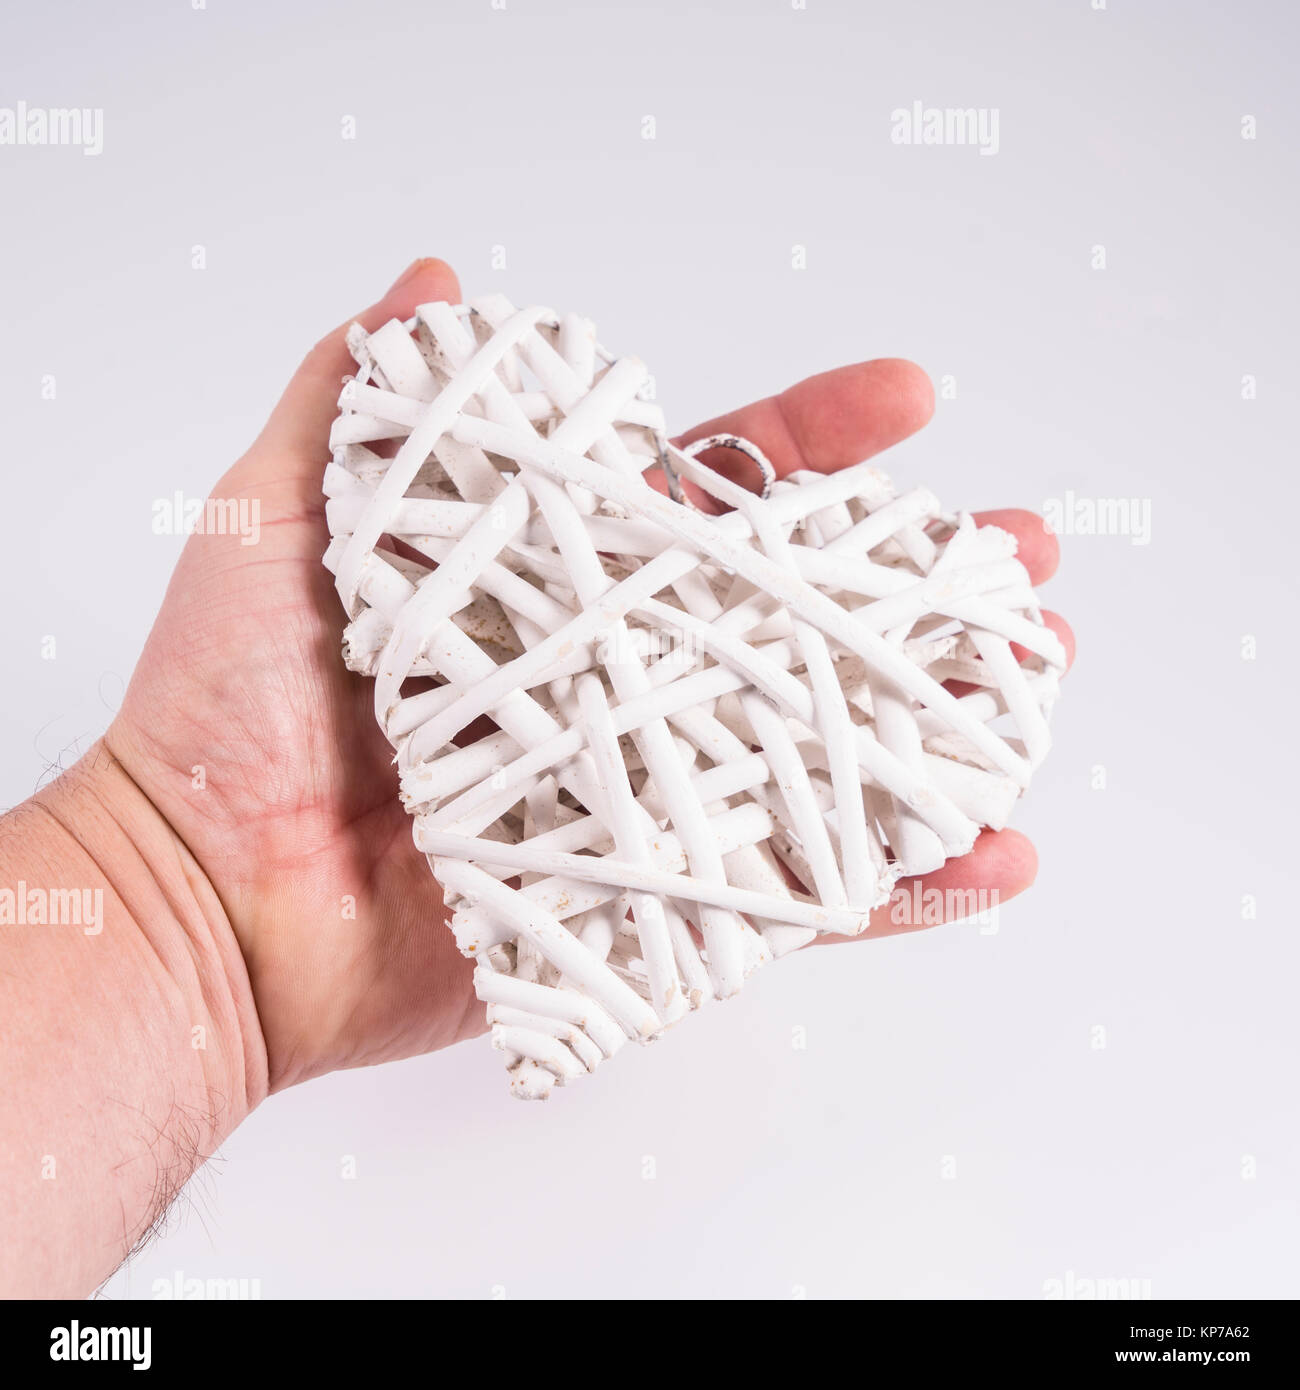 a heart formed with white colored wooden sprigs in hand Stock Photo